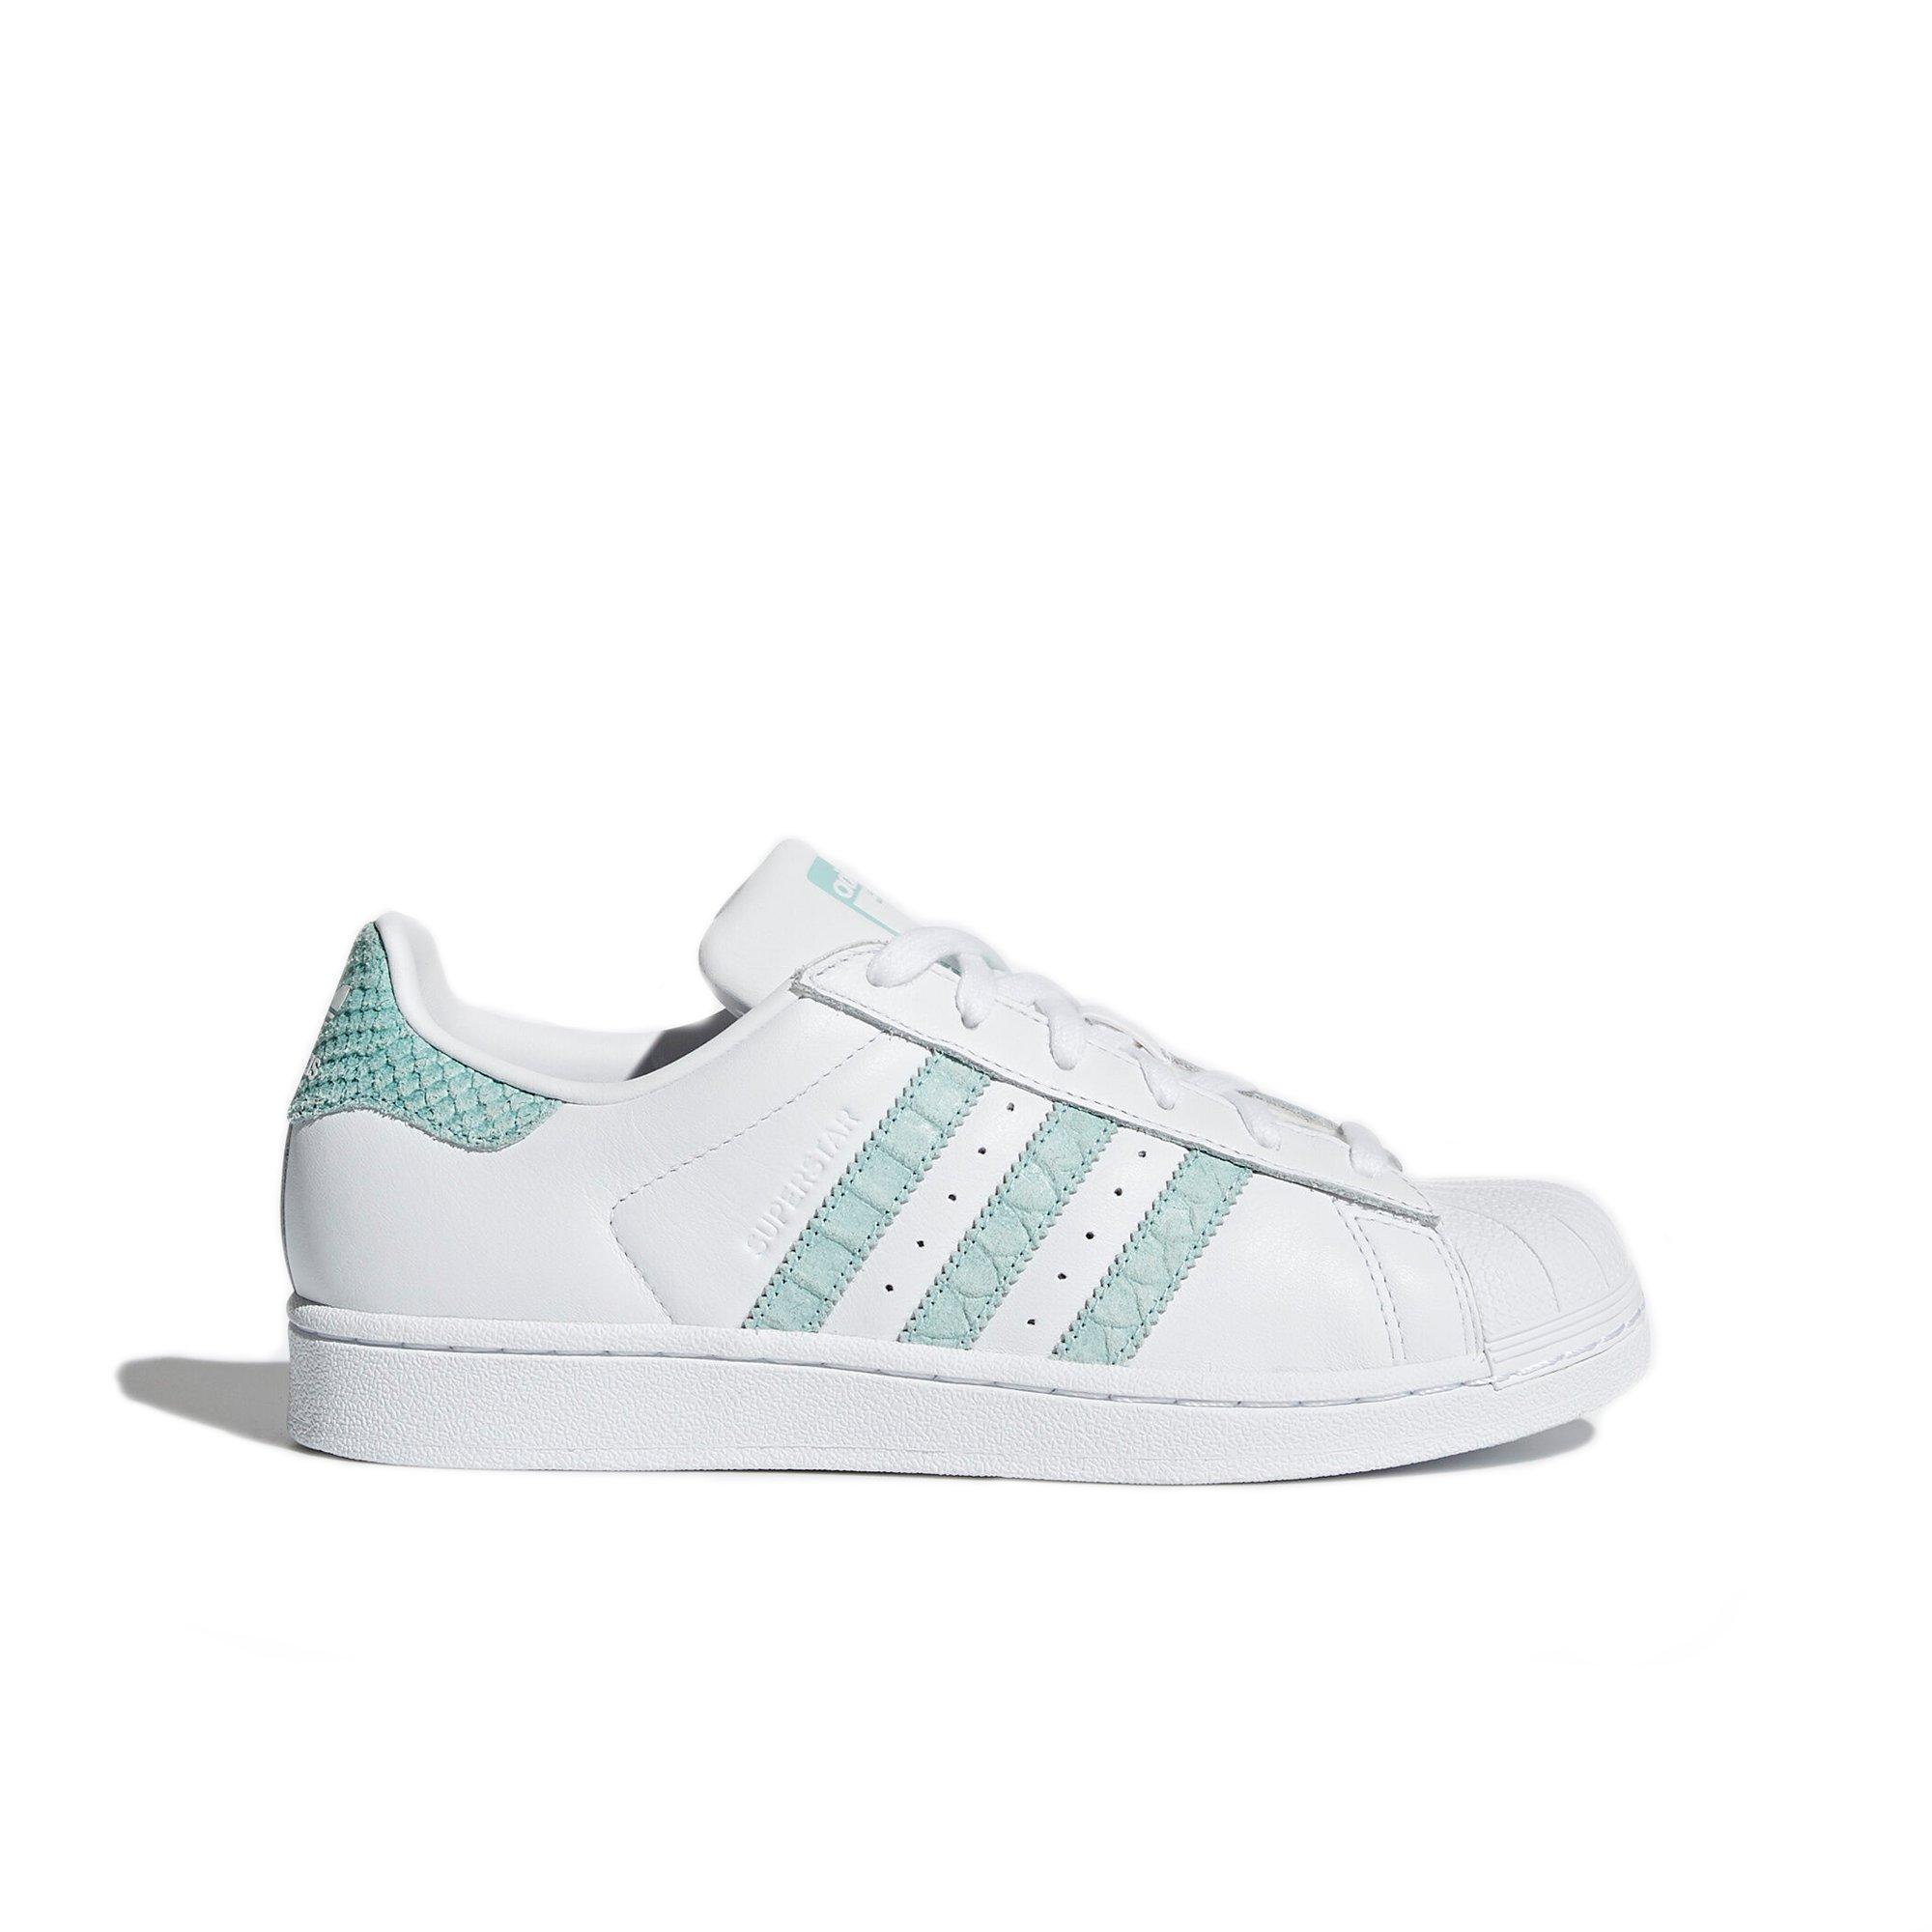 superstar turquoise